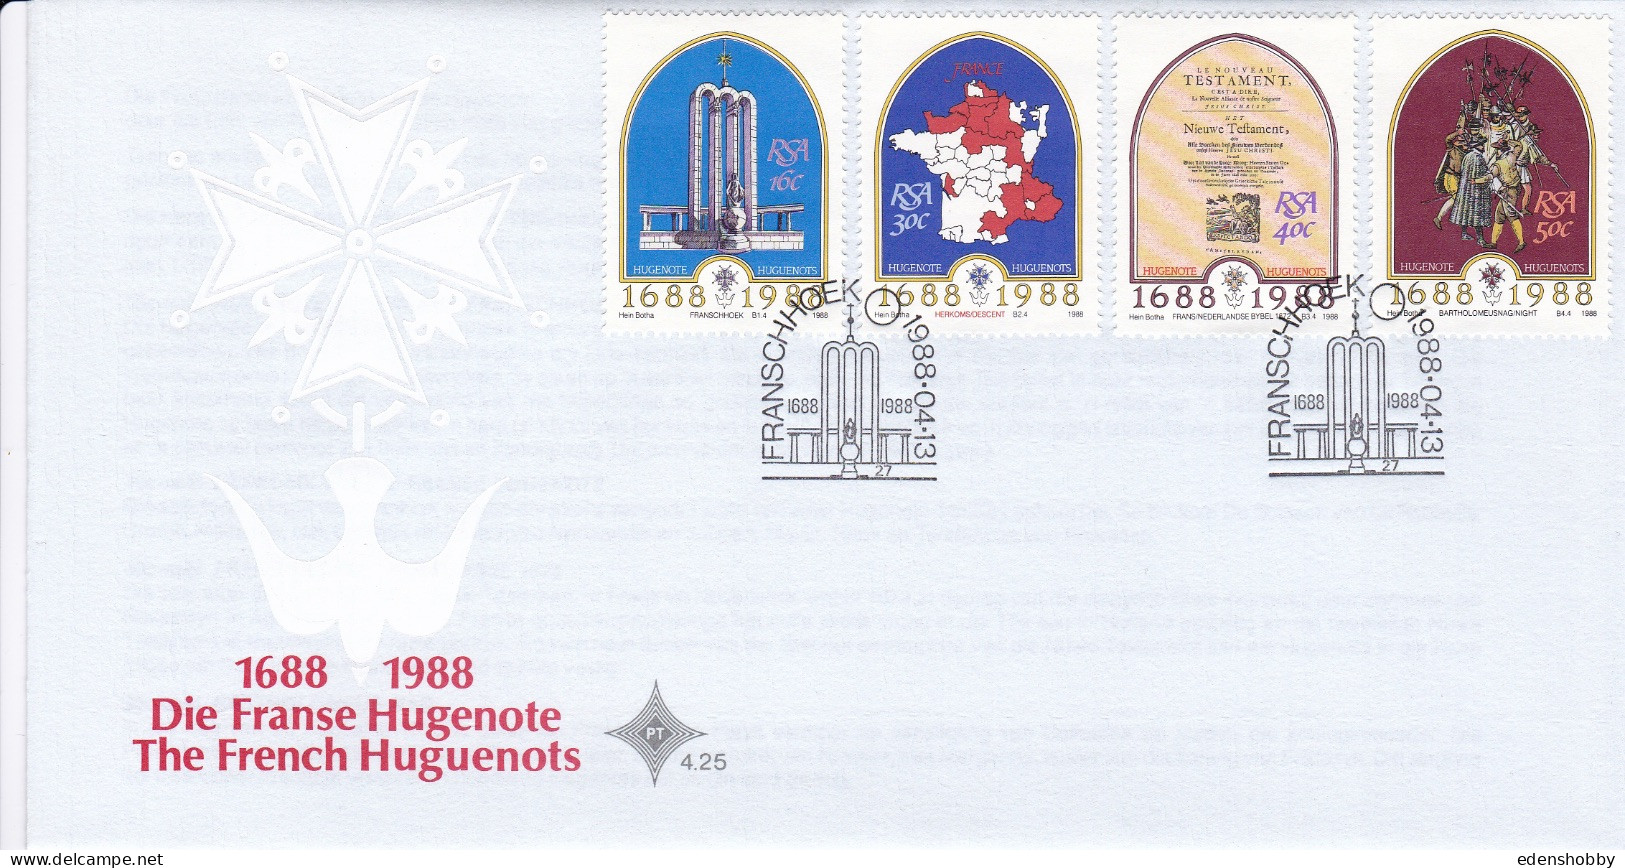 SPECIAL SUNDAY OFFER SOUTH AFRICA -  FDCs 1885-1989 - 29 Official First Day Covers